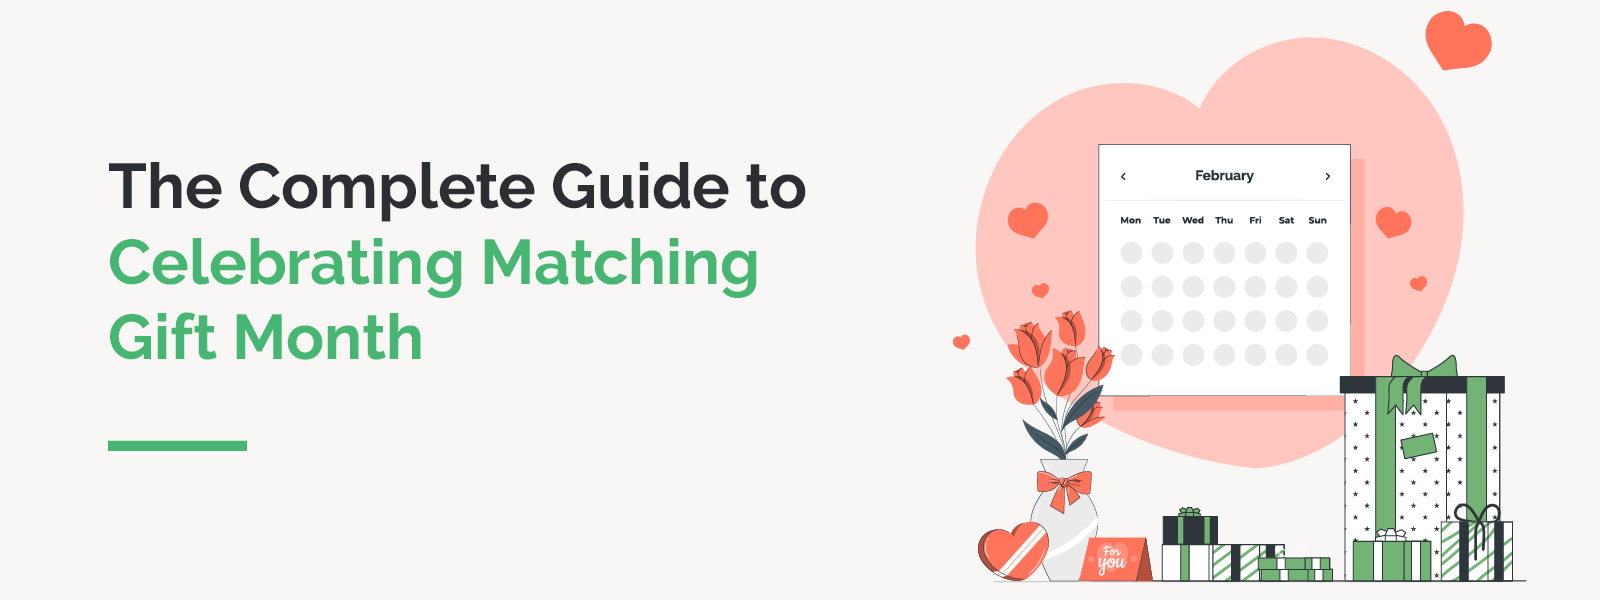 Here's How You Can Celebrate Matching Gift Month This February